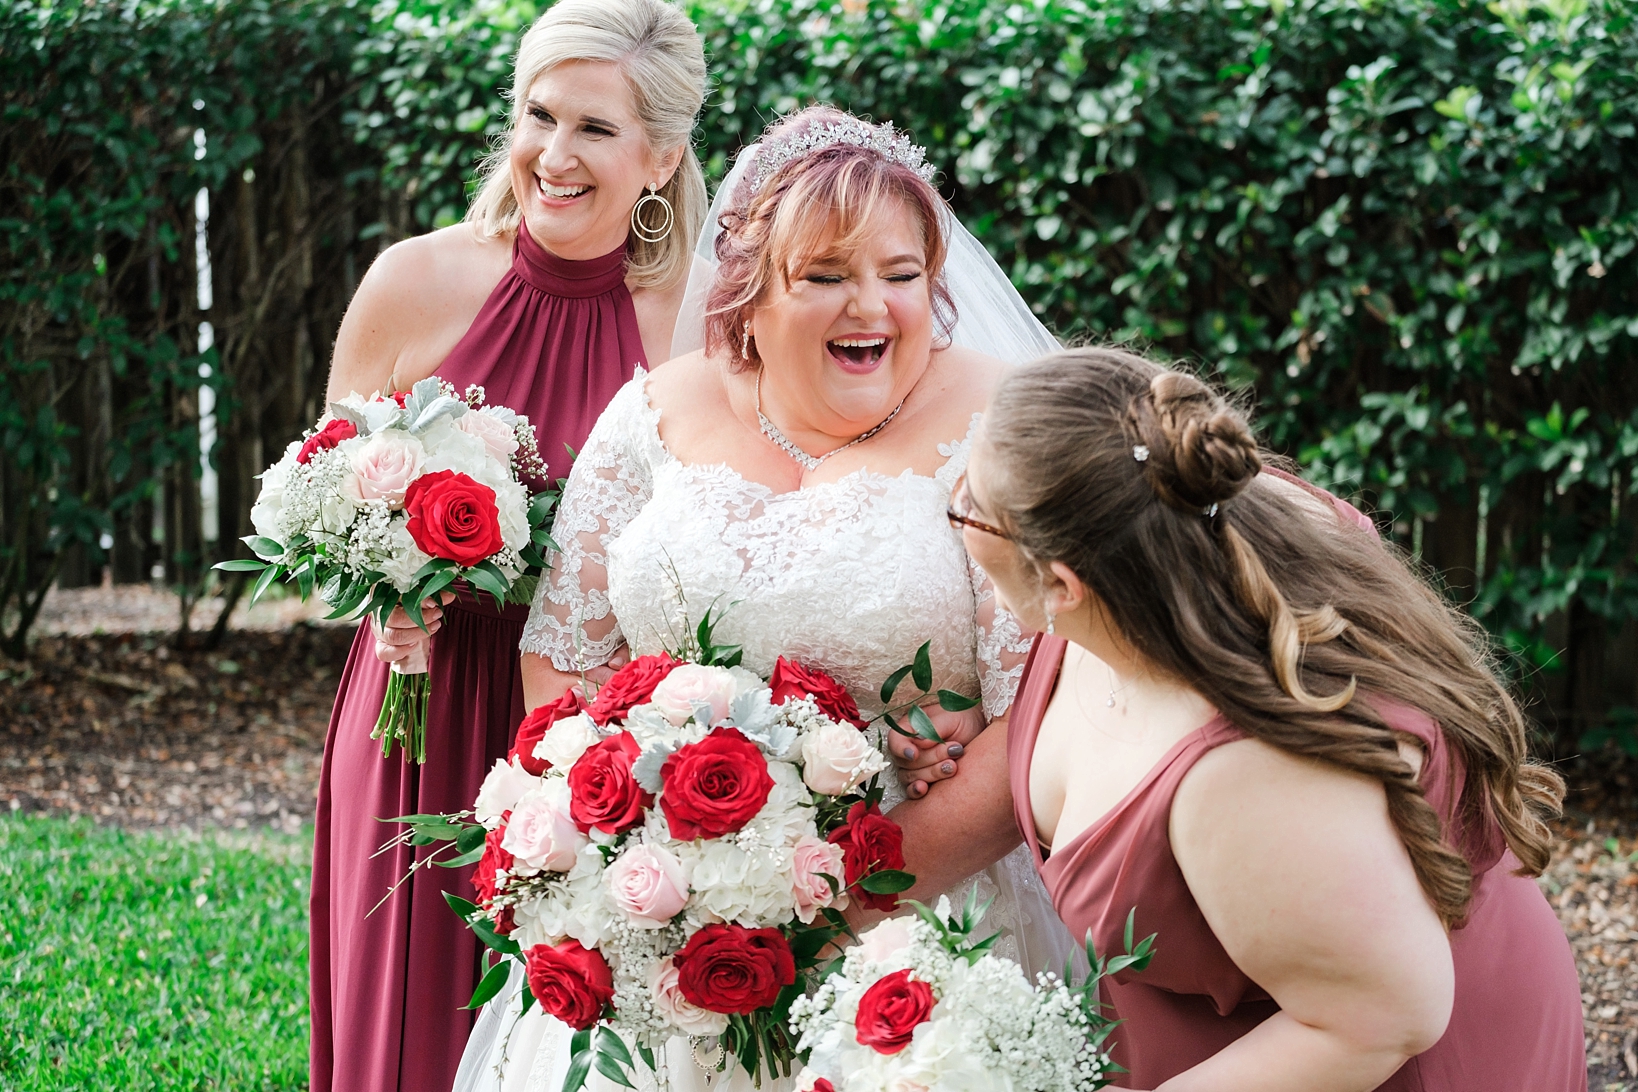 Candid moment of the Bride laughing with her Girls before her cross creek wedding celebration